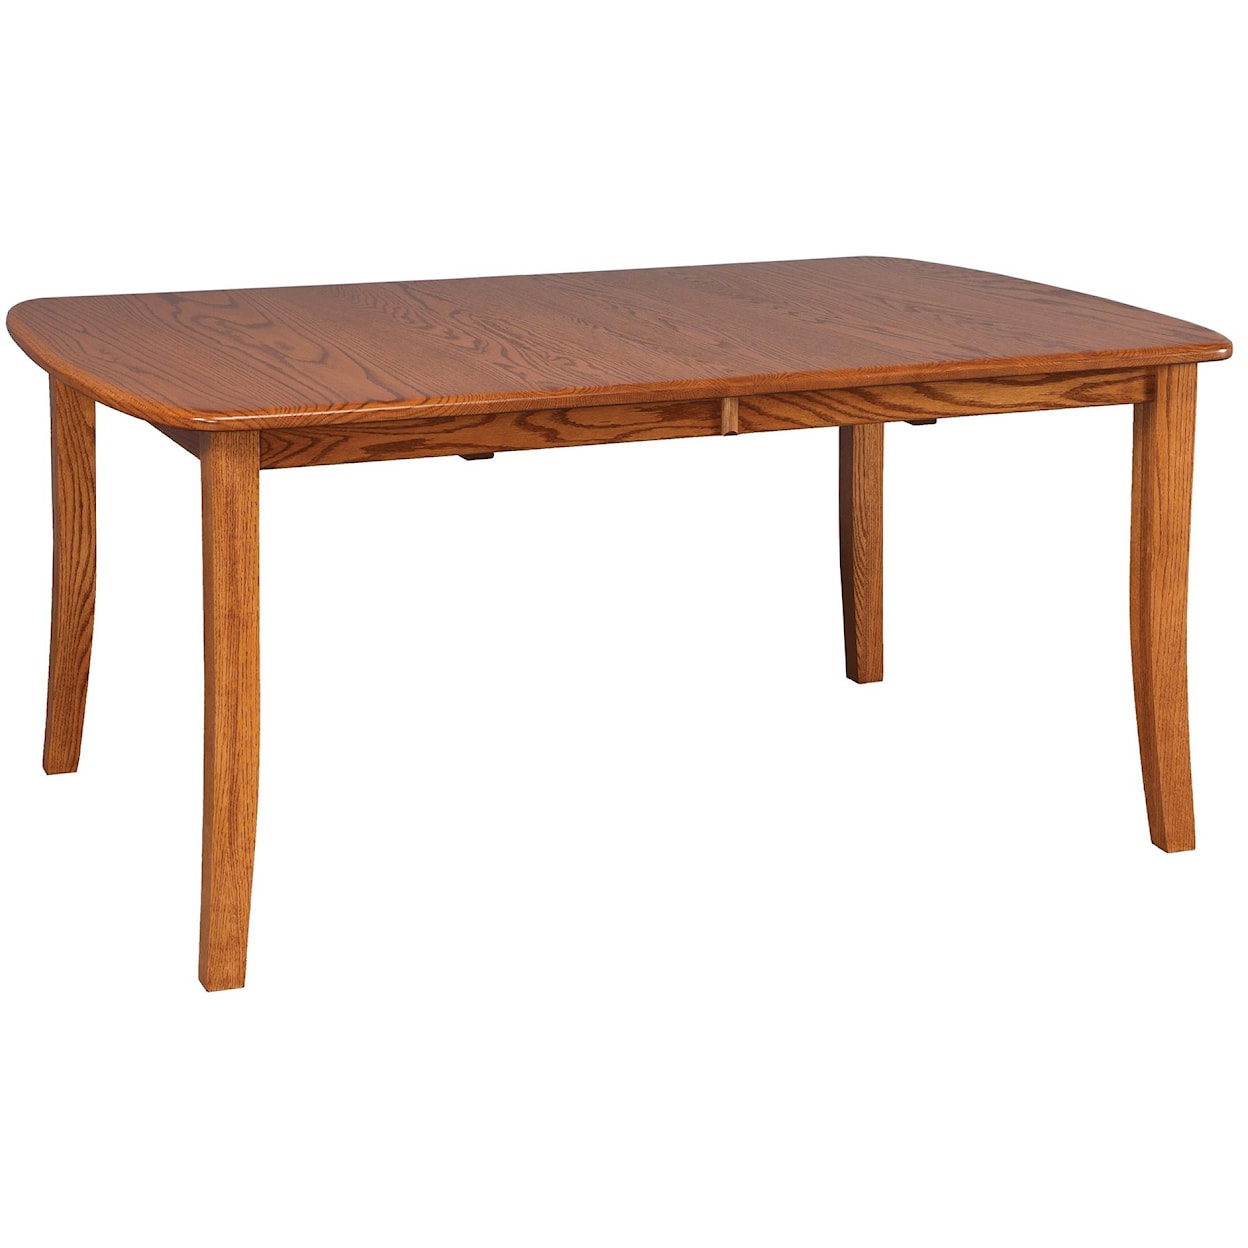 Daniel's Amish Tables 36" Solid Wood Table